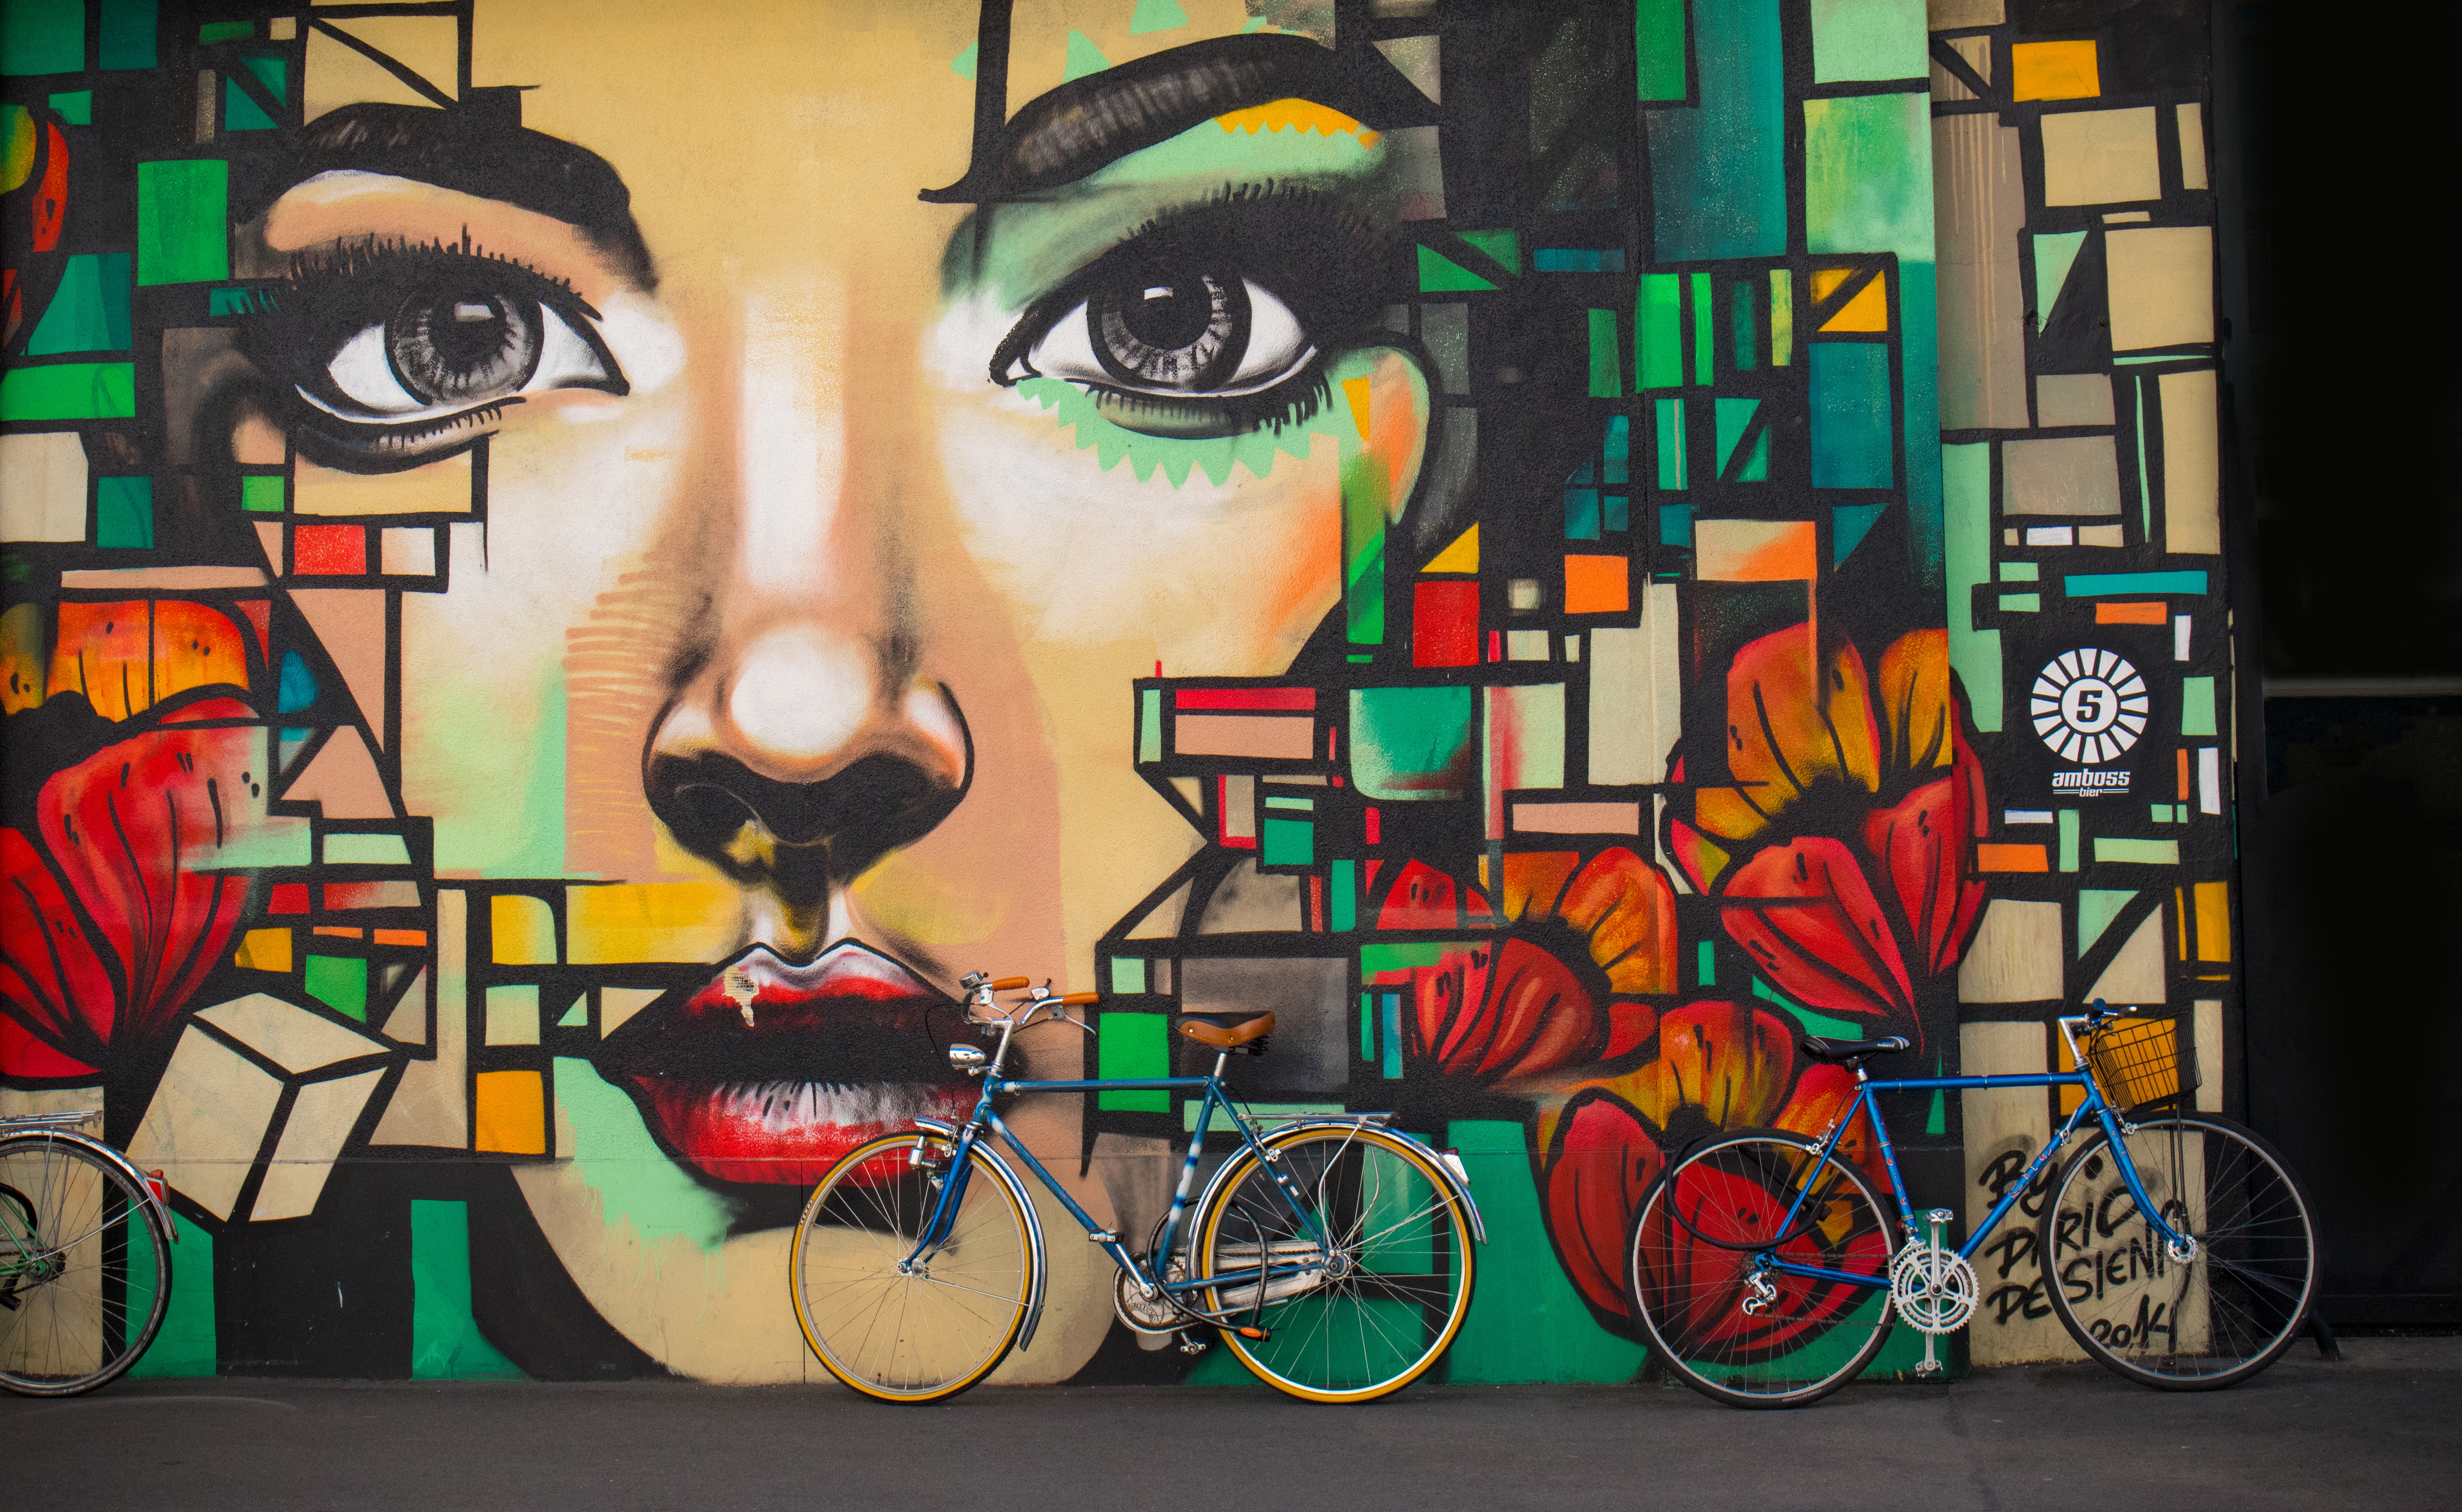 86300 download wallpaper art, bicycles, wall, graffiti, face screensavers and pictures for free